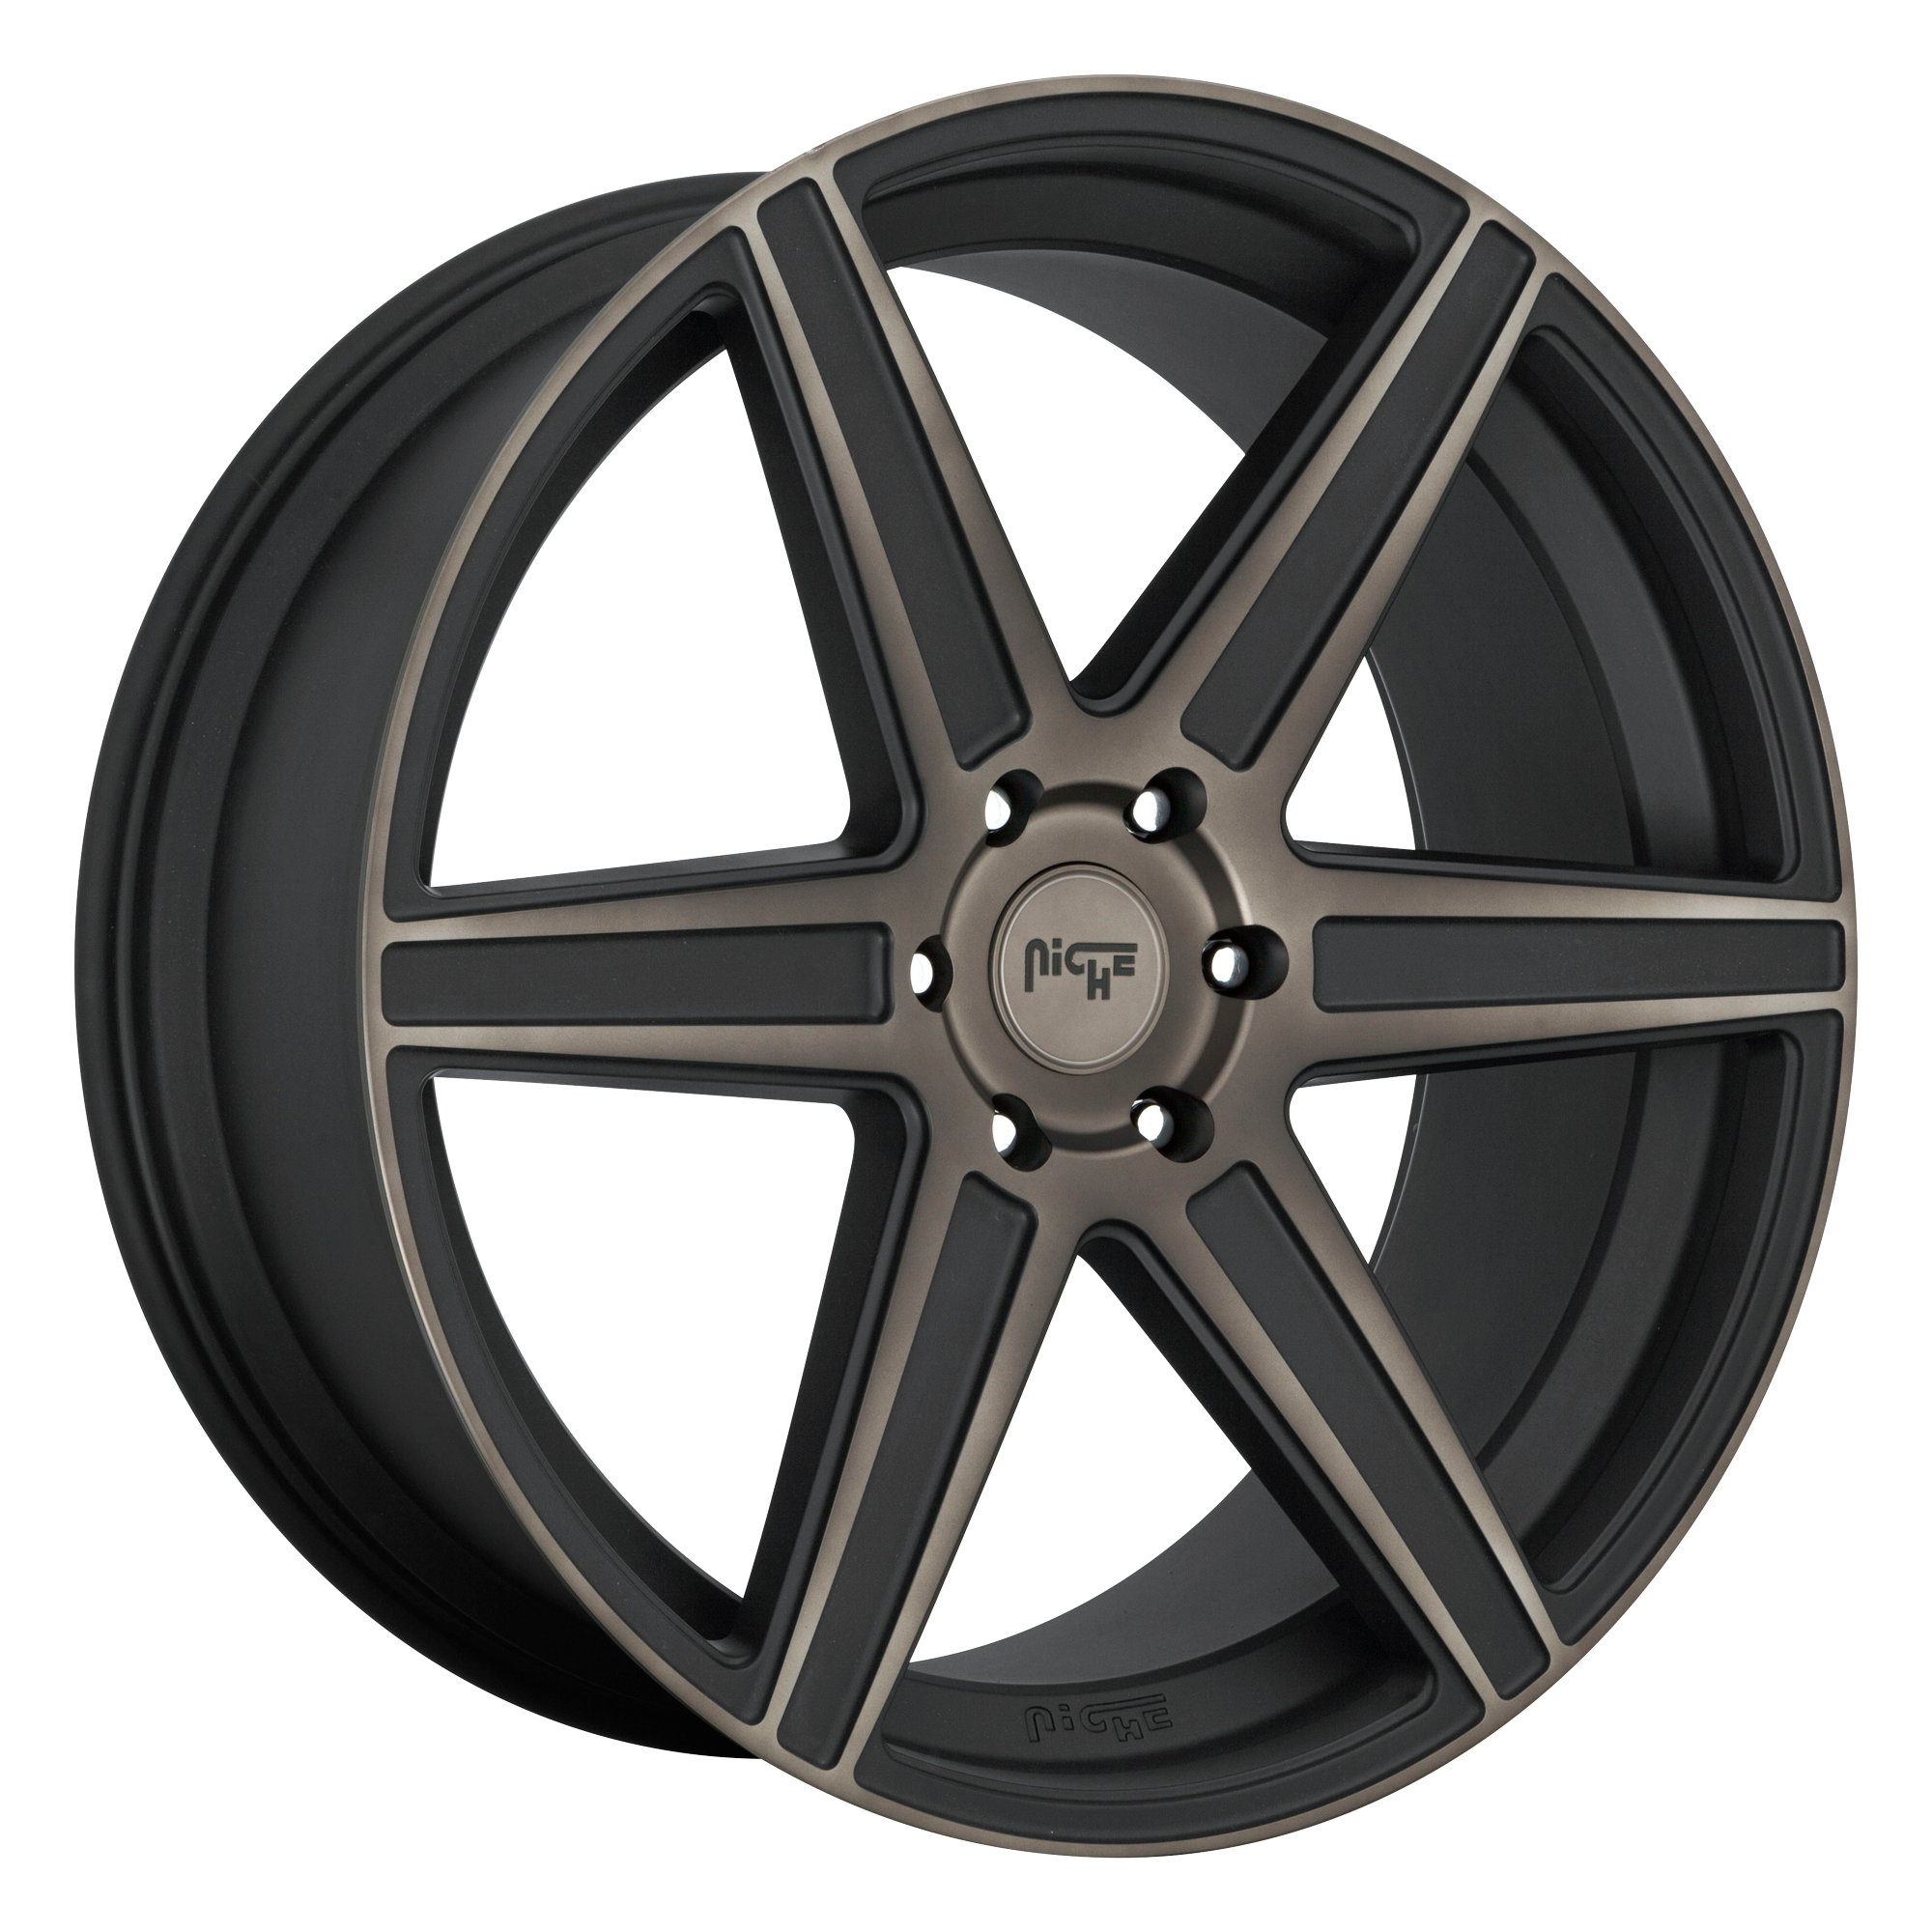 CARINA 22x9.5 6x135.00 MATTE MACHINED DOUBLE DARK TINT (30 mm) - Tires and Engine Performance